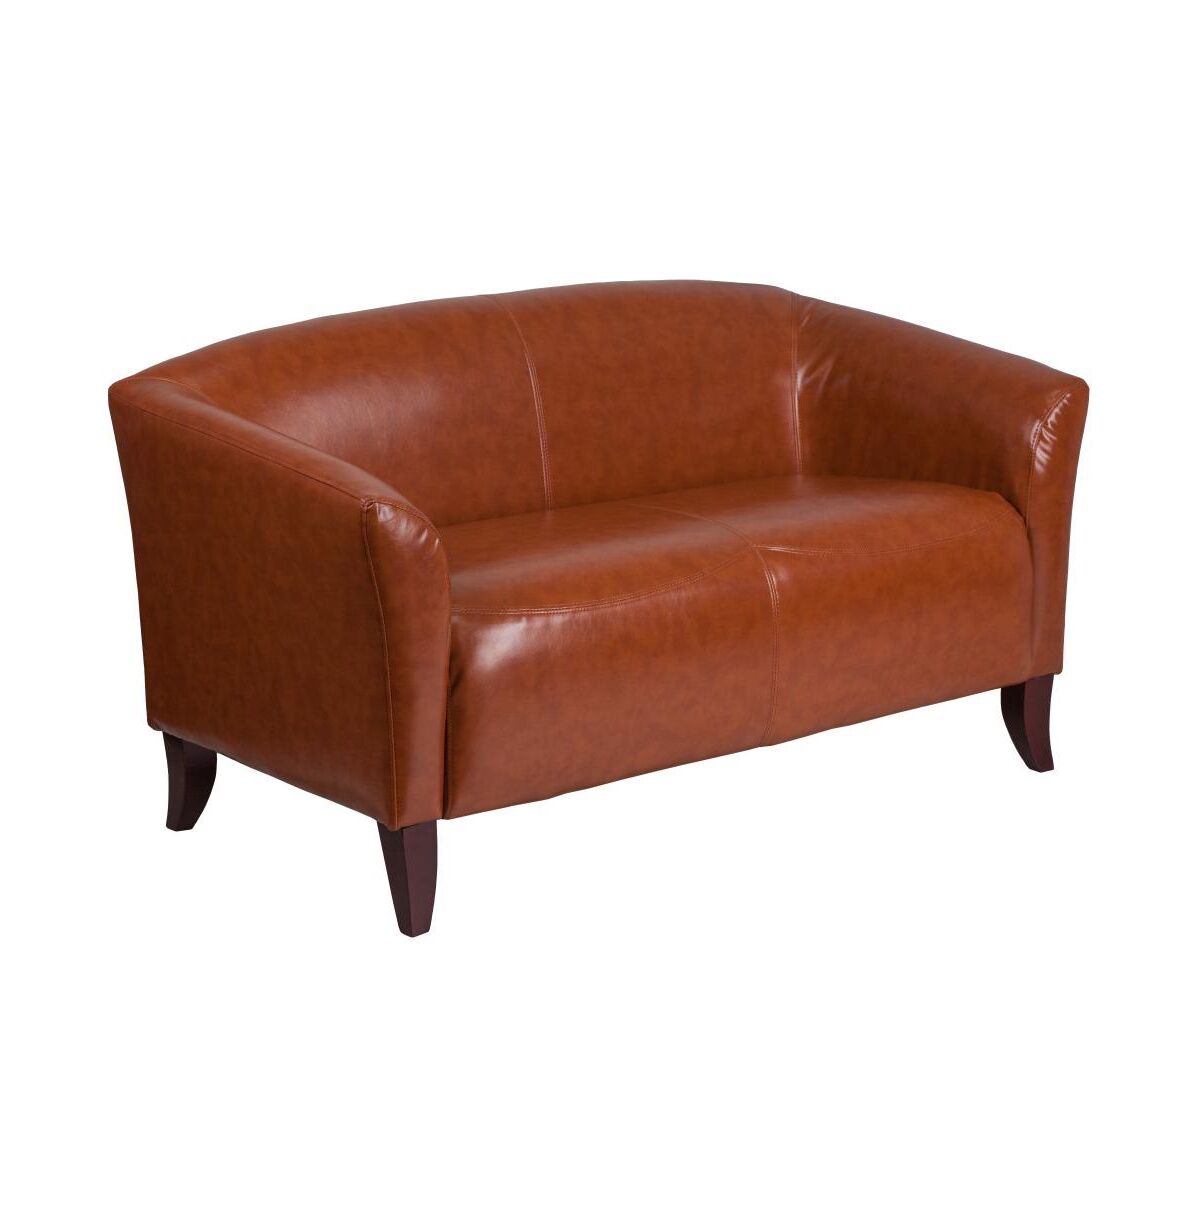 Emma+oliver Leather soft Reception/Living Room Loveseat With Cherry Wood Feet - Cognac